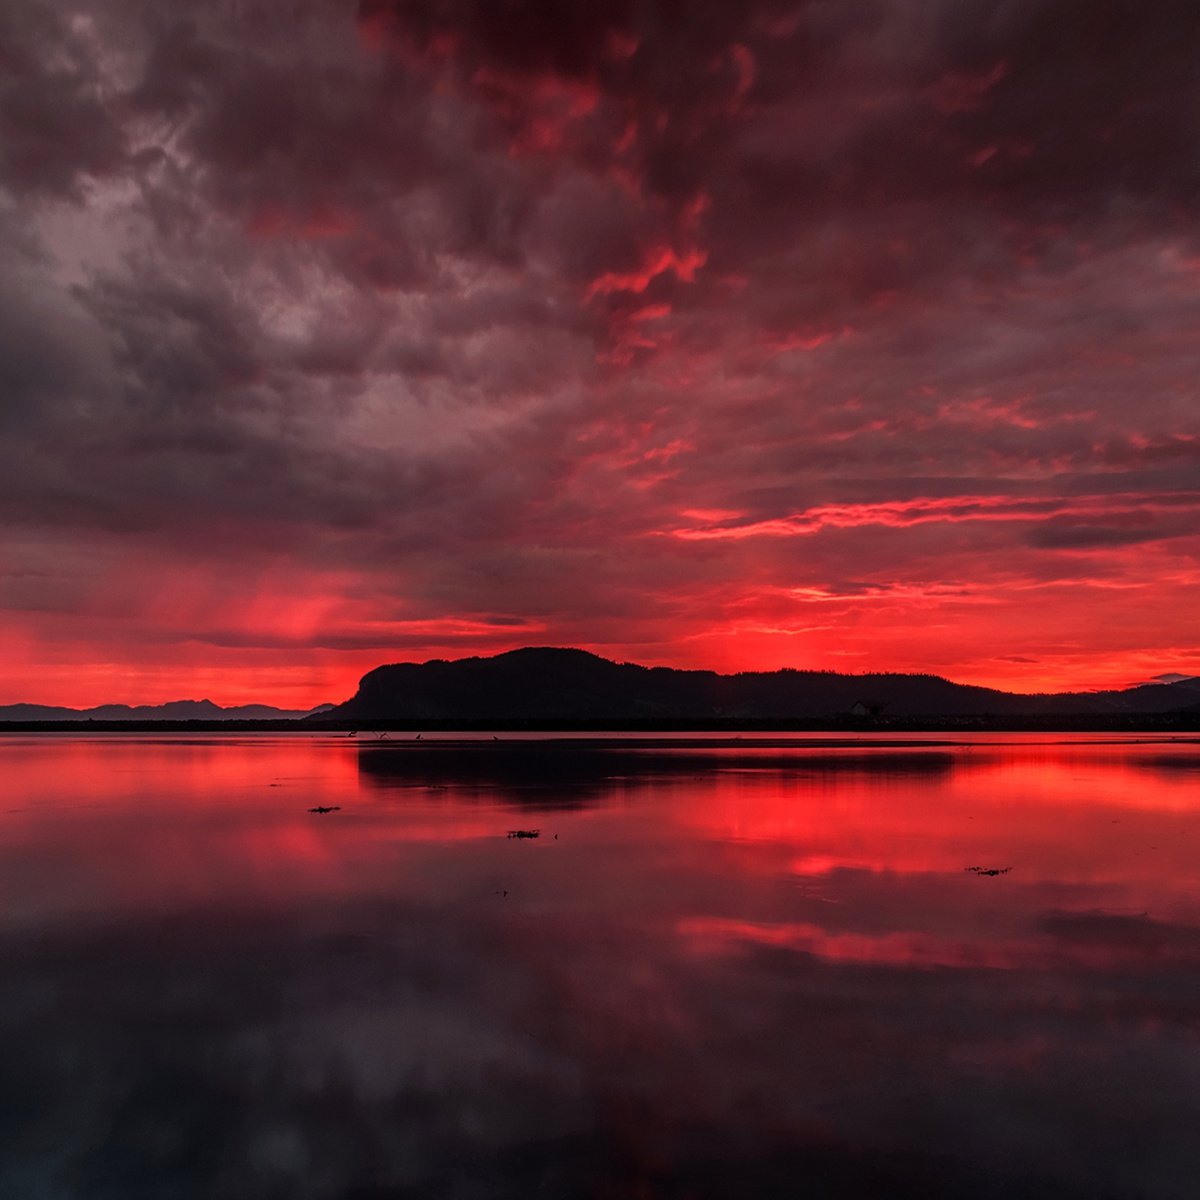 The red sunset by Jacek Falmur